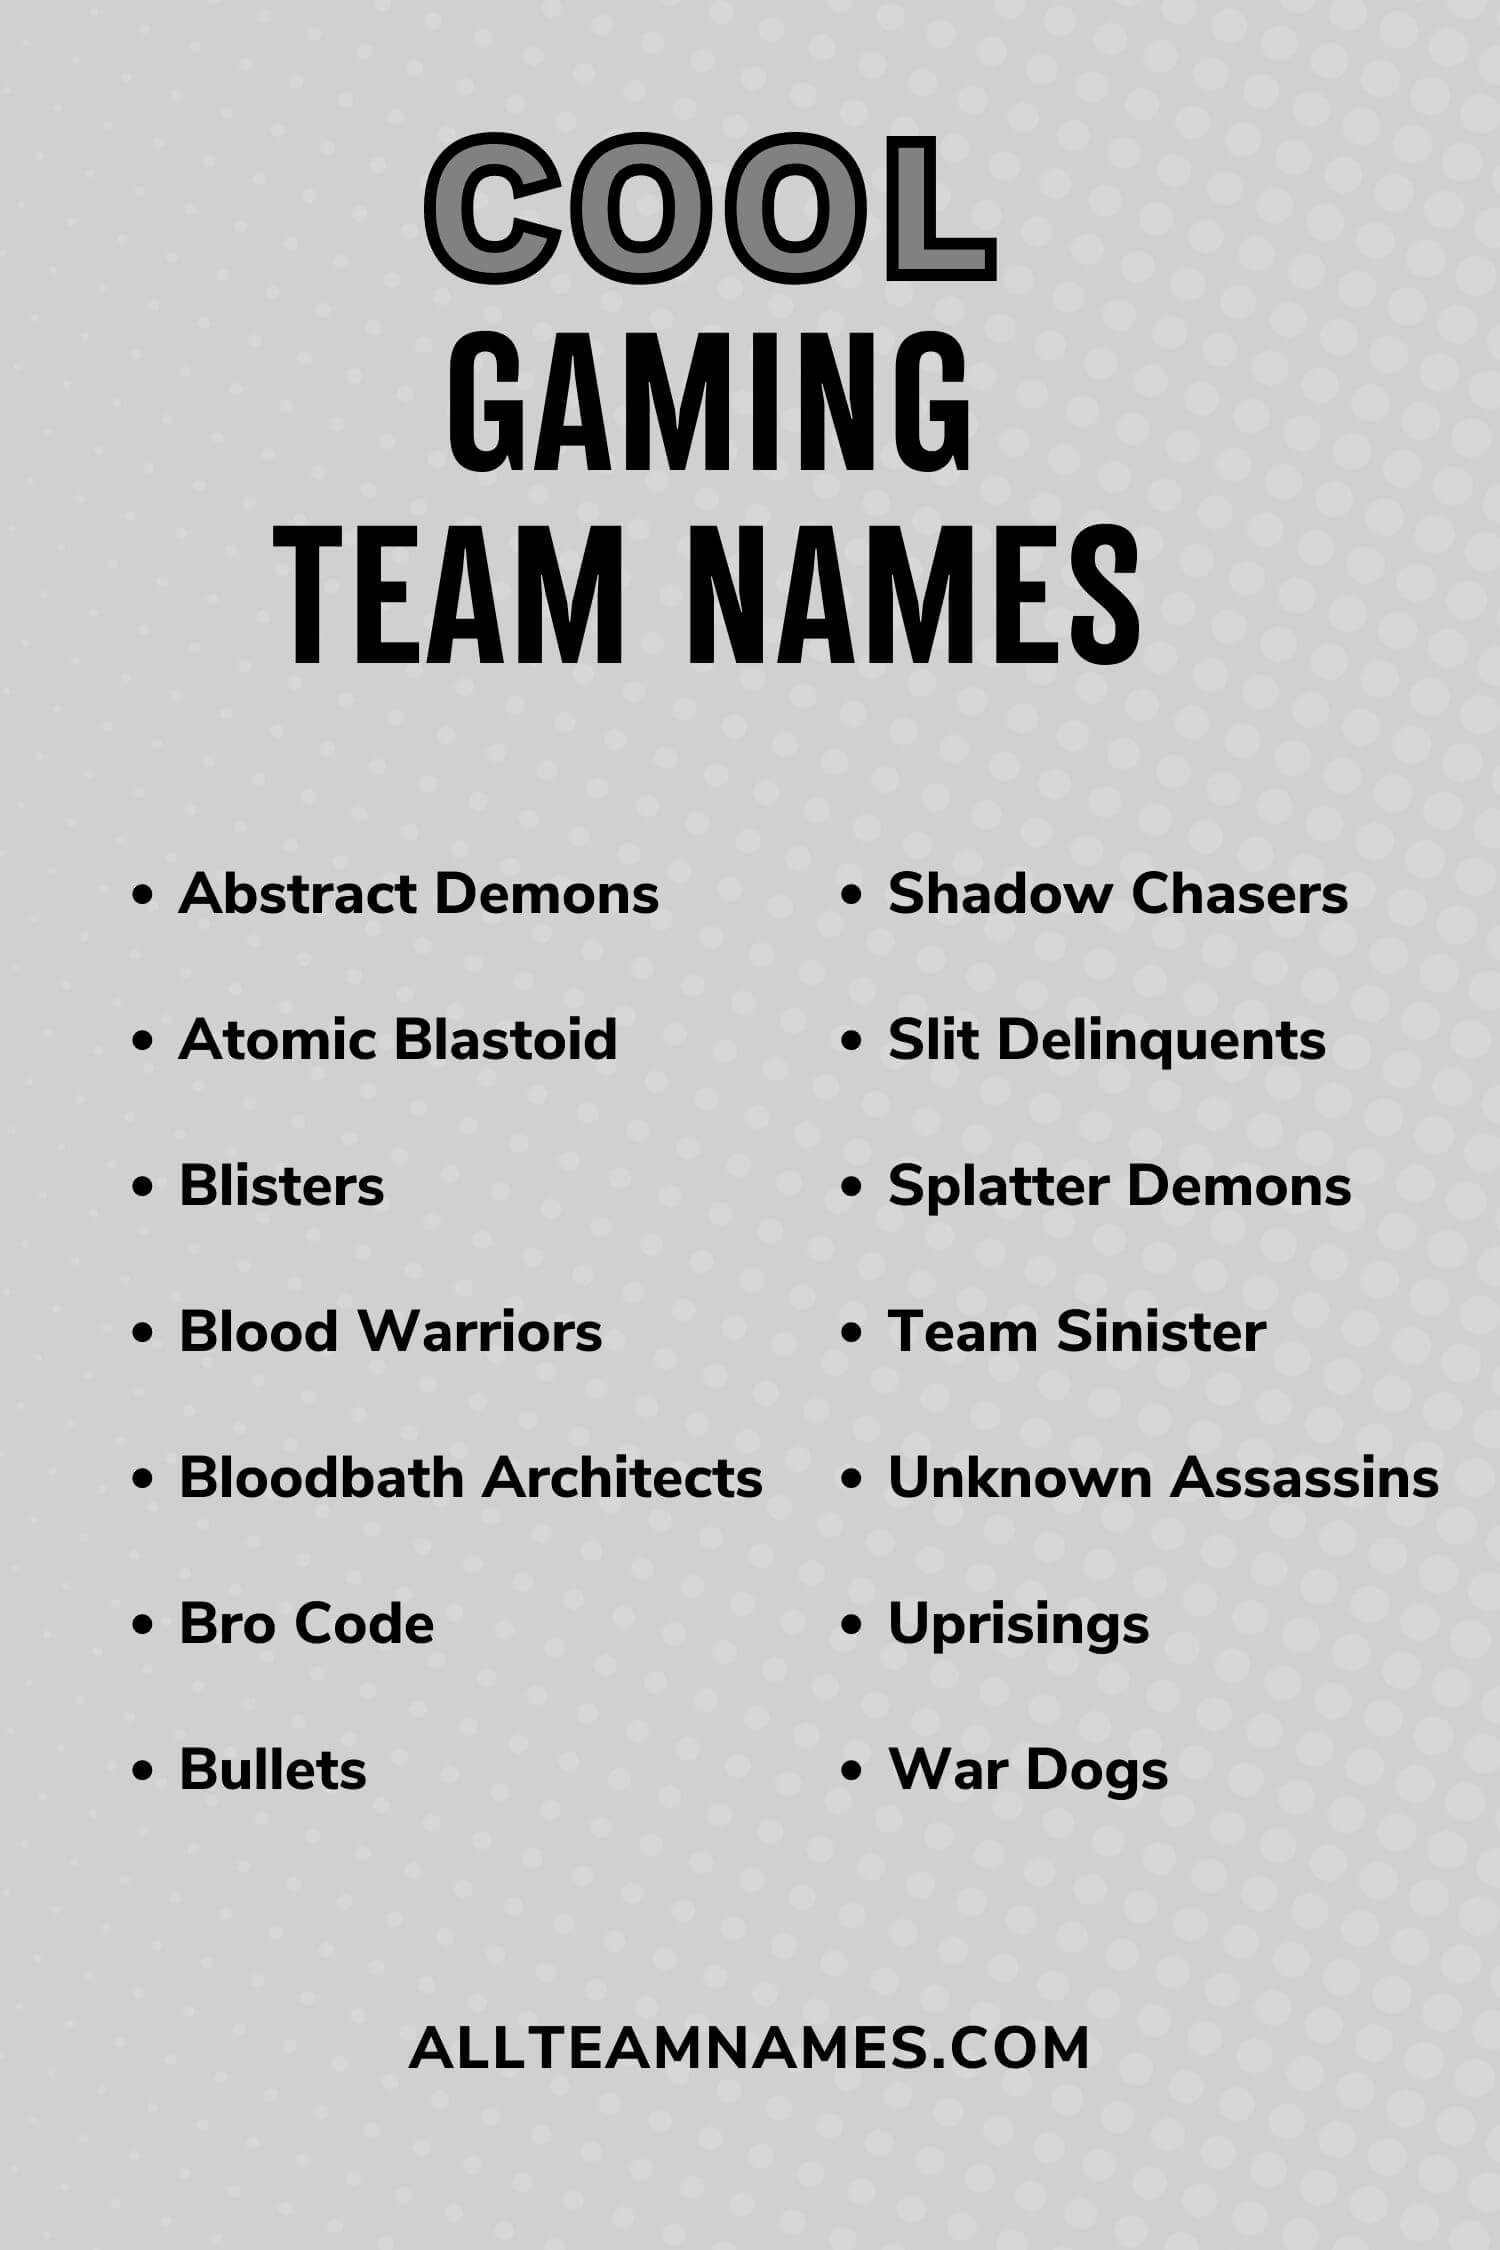 900+ Badass Gaming Names That Are Perfect for Every Gamer